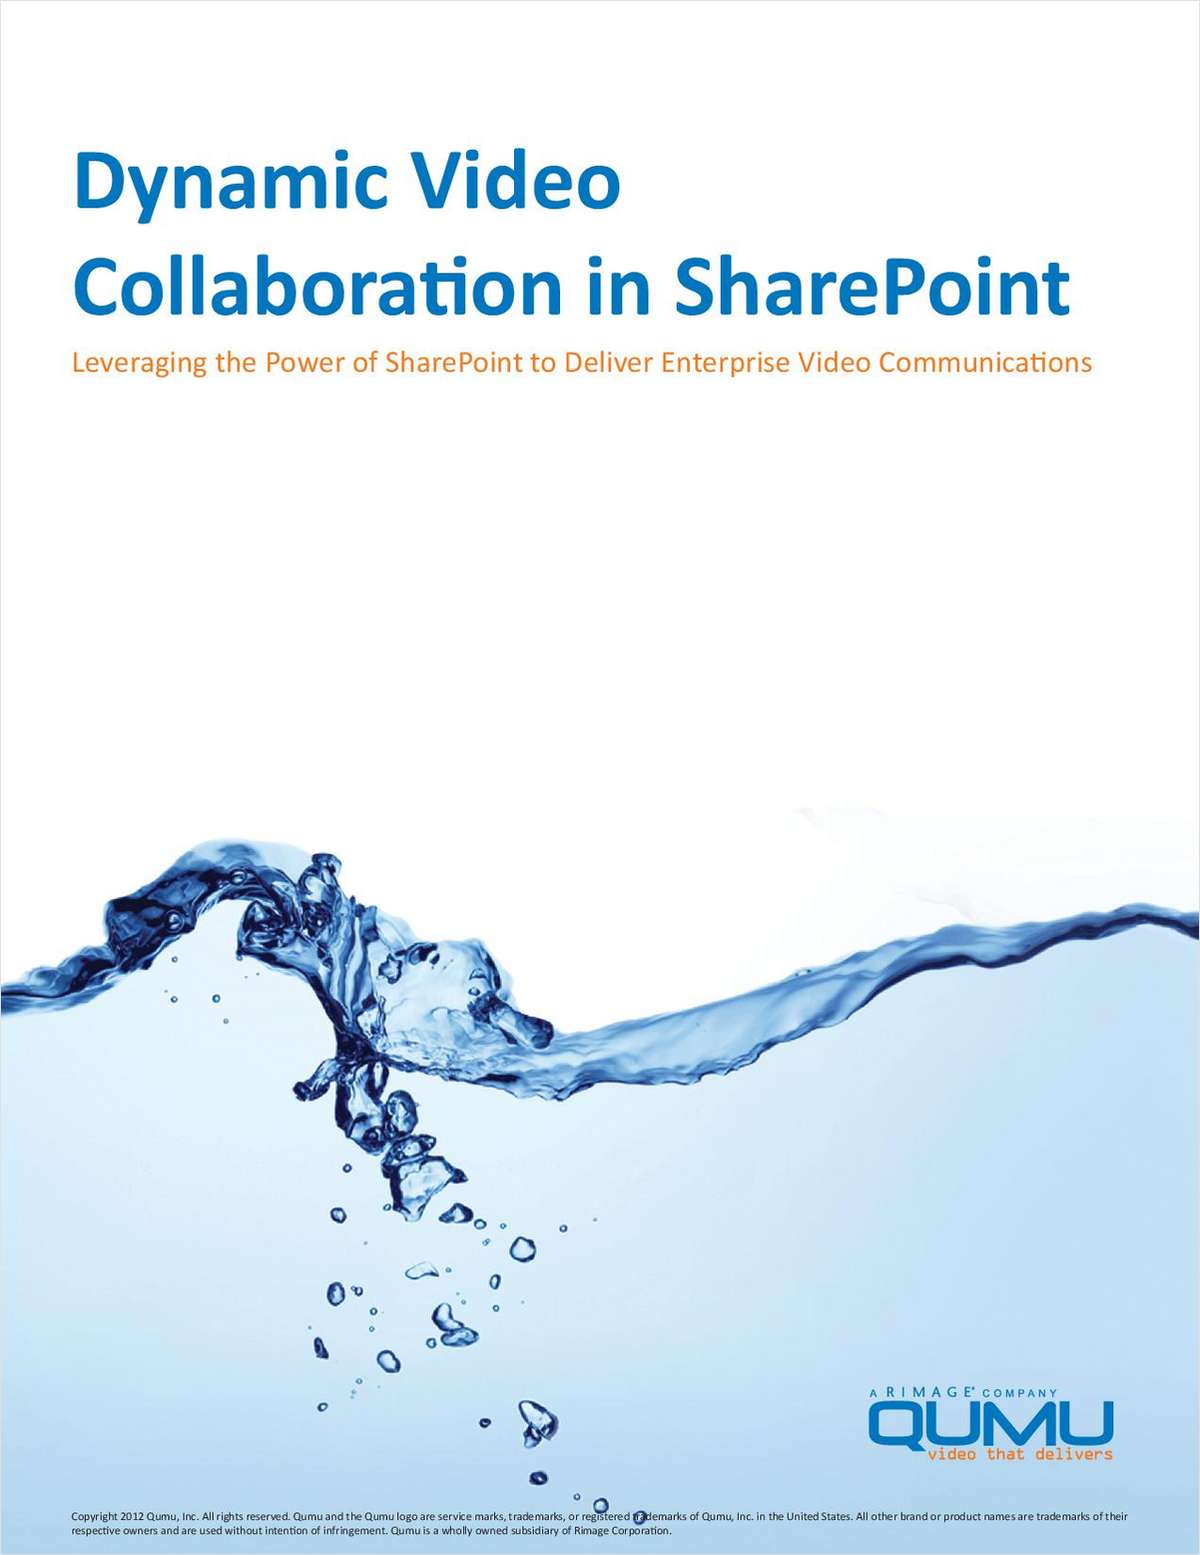 Dynamic Video Collaboration in SharePoint